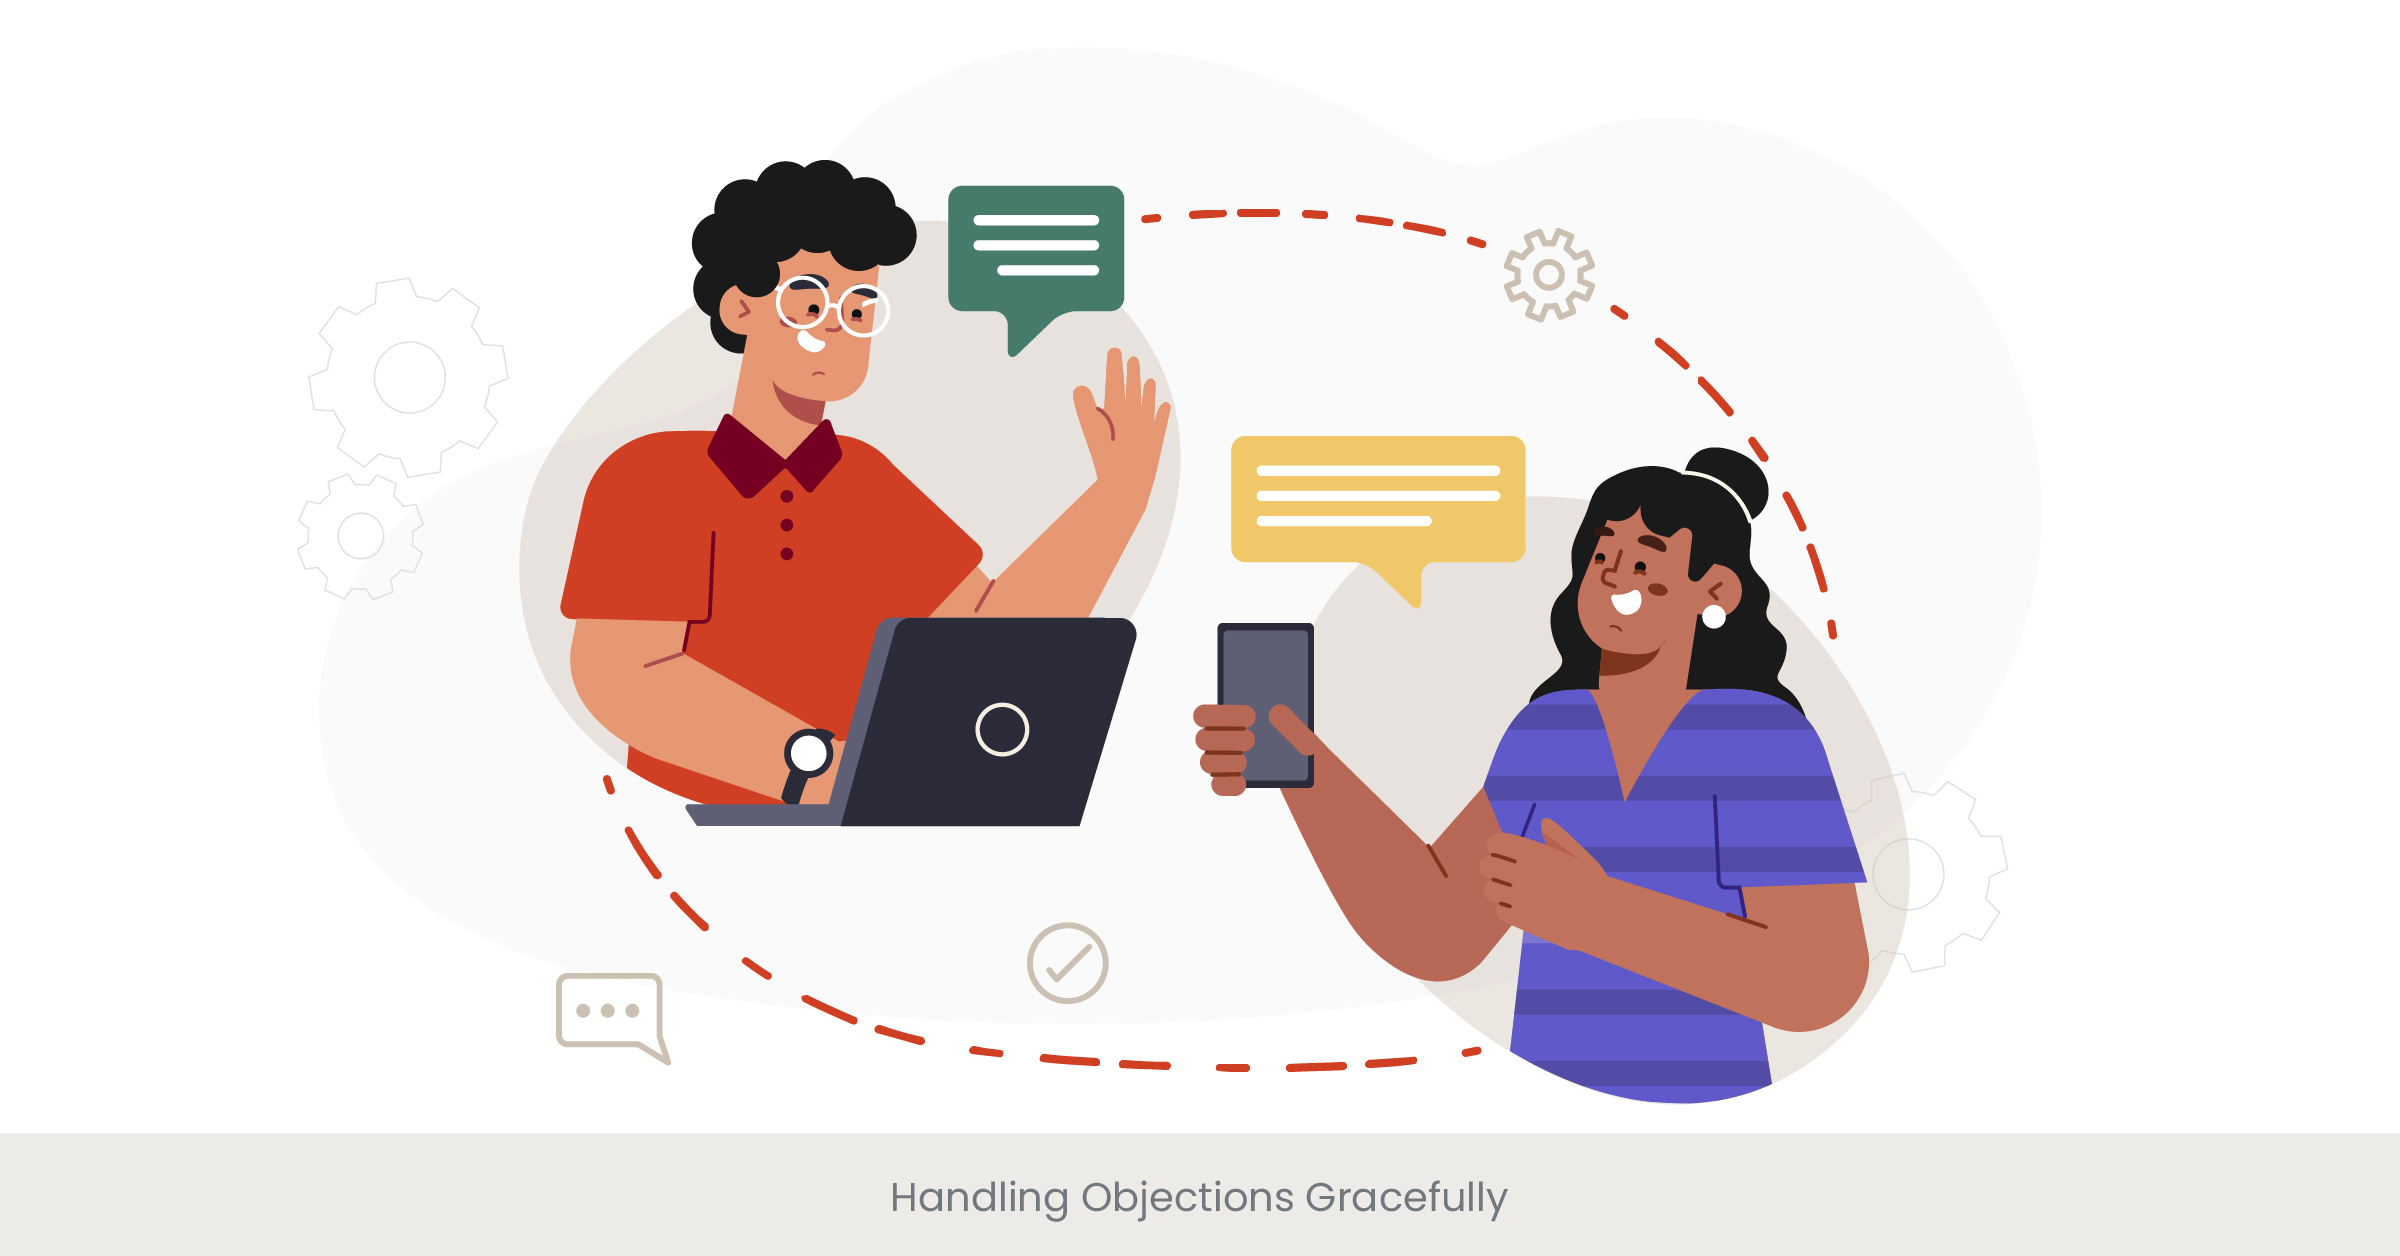 Handling Objections Gracefully